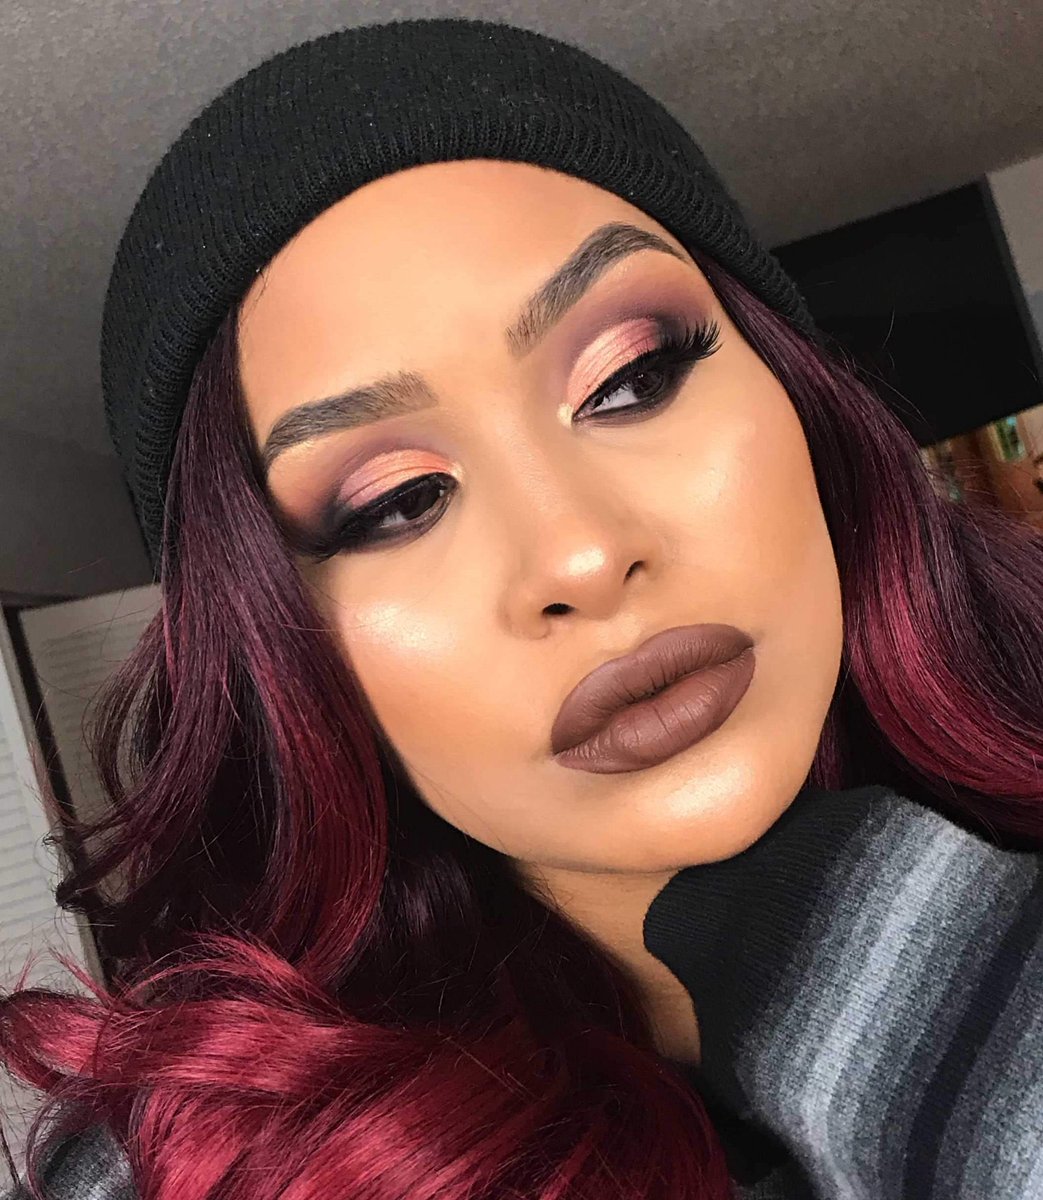 We keep a couple of bad beauties with us rockin  #STUNNA Lip Paint in chocolate brown newd shade ‘UNVEIL’  @Lisa_alamode  @javeauriel @klrussillo @RealThebasicb